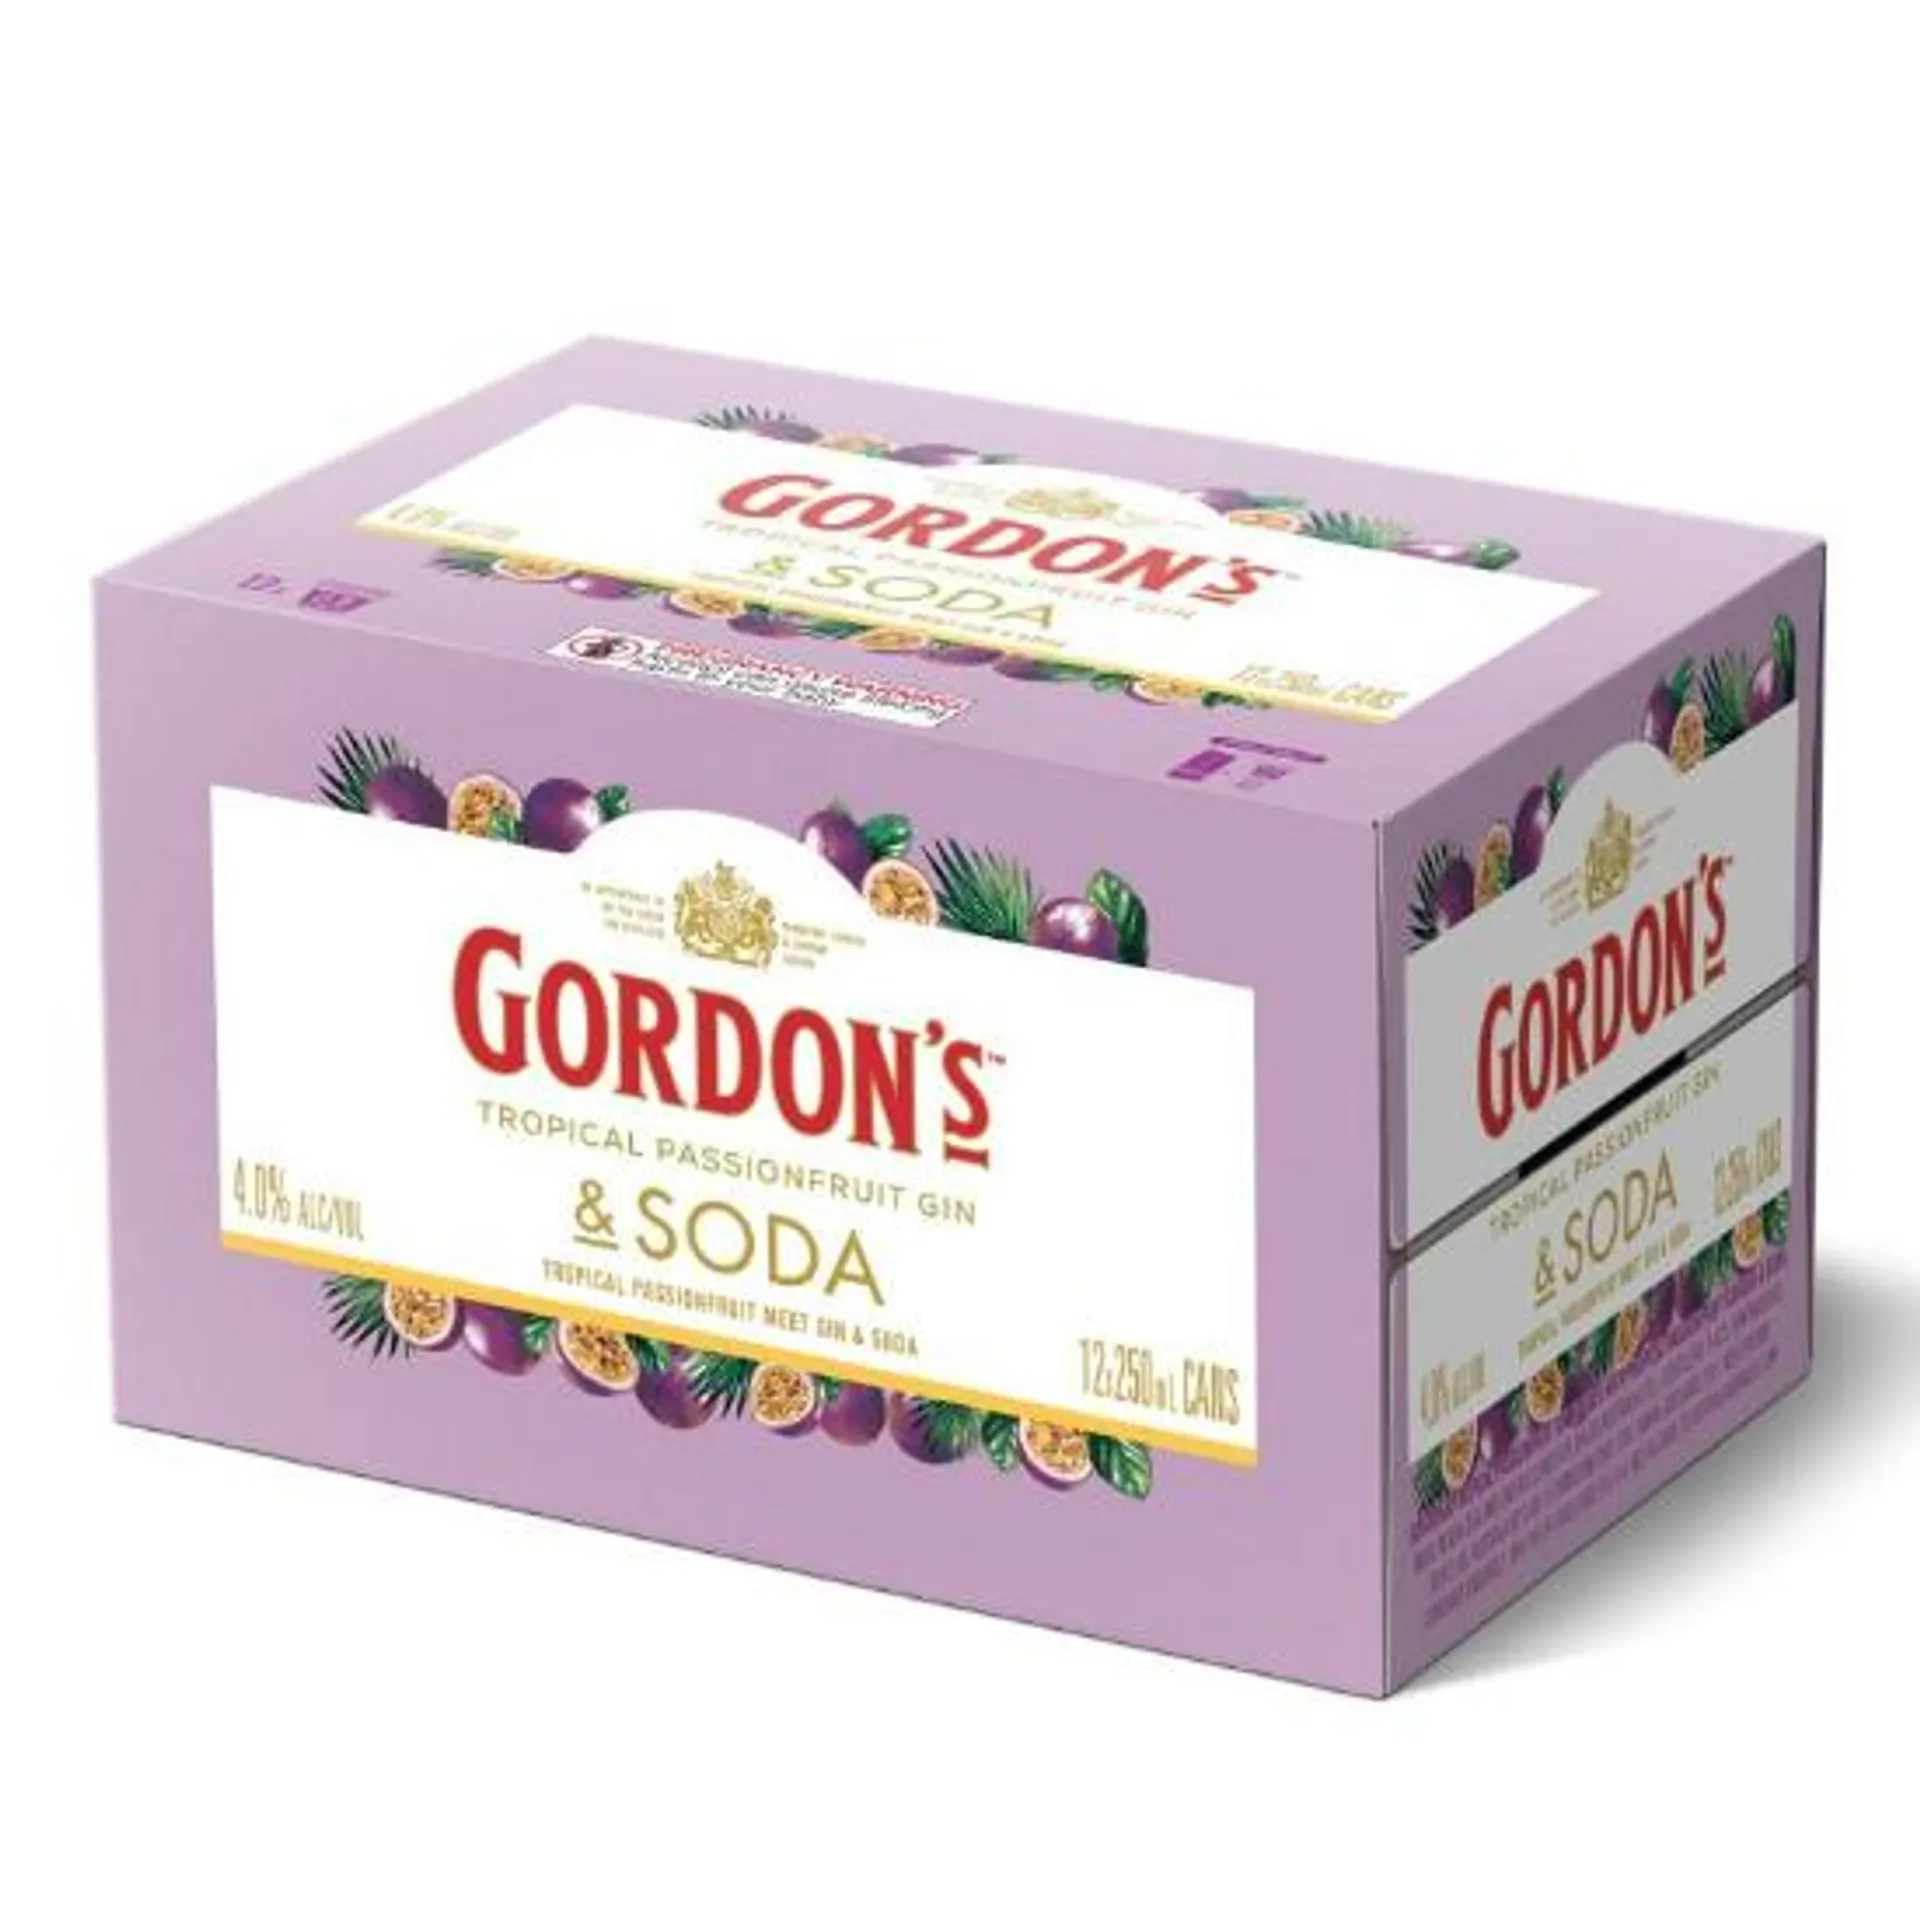 Gordon's Tropical Passionfruit Gin & Soda 4% Cans 12x250ml